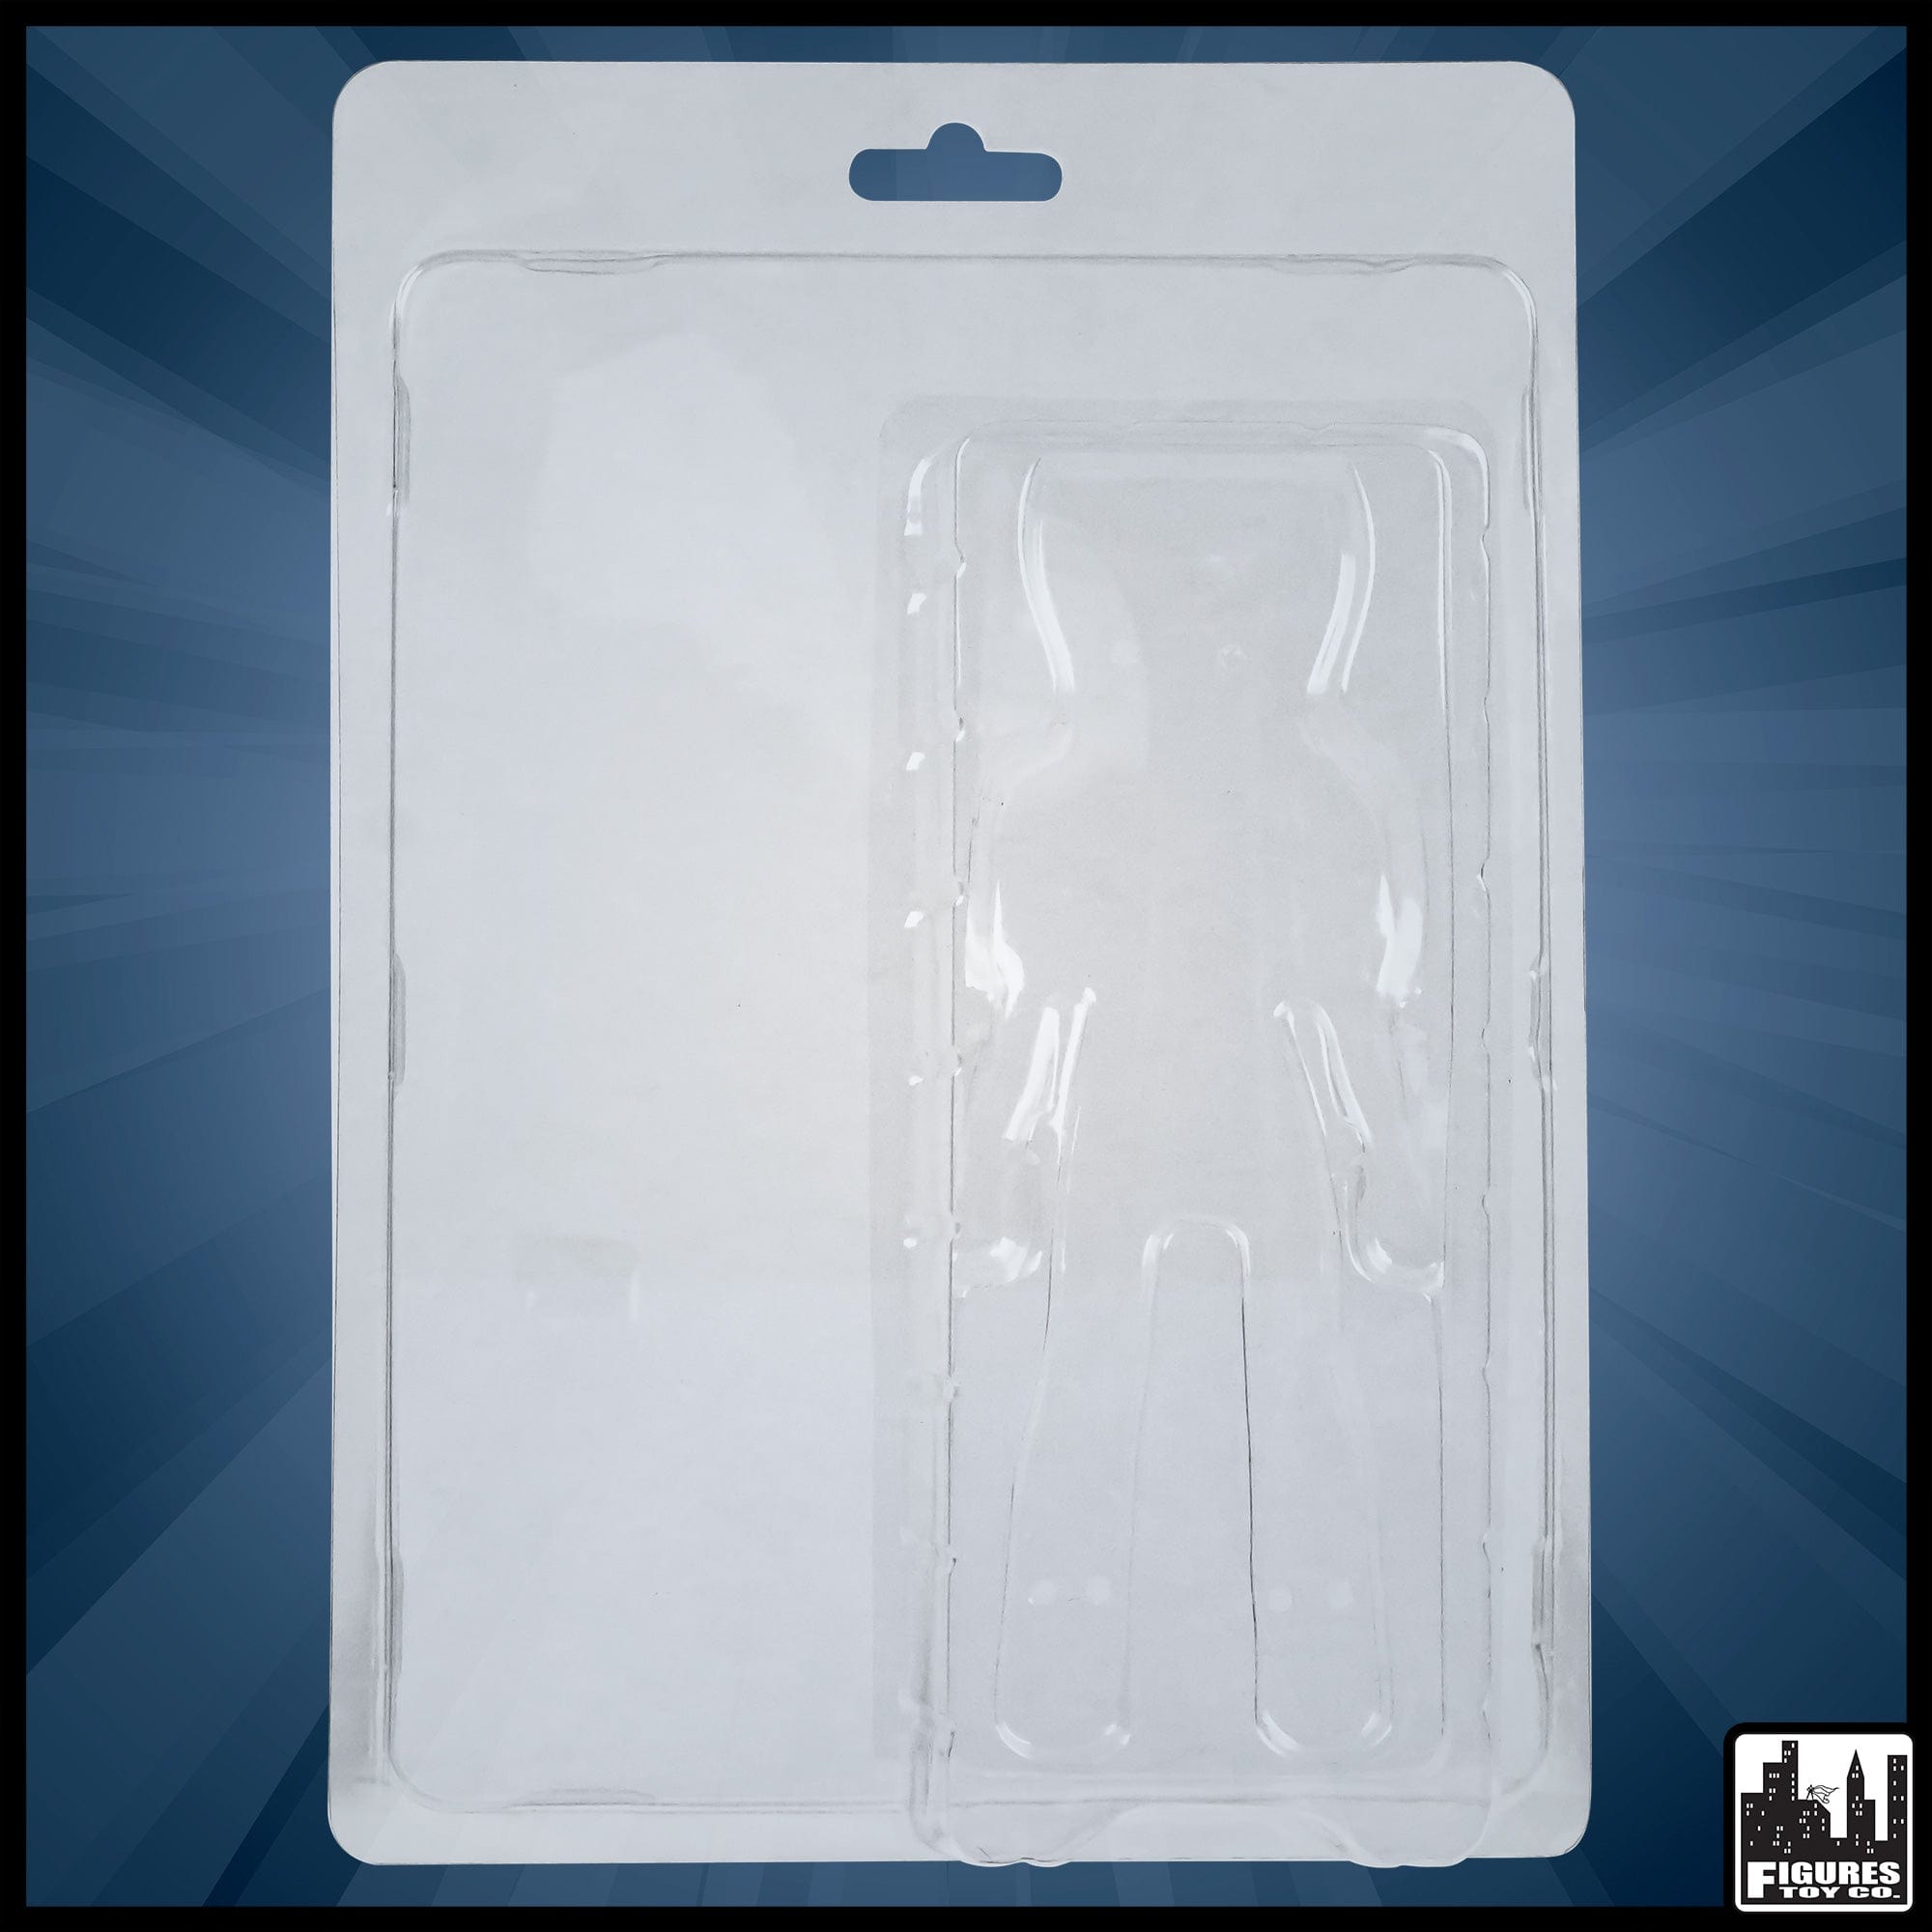 FTC Clamshell Packaging For Carded 8 Inch Figures